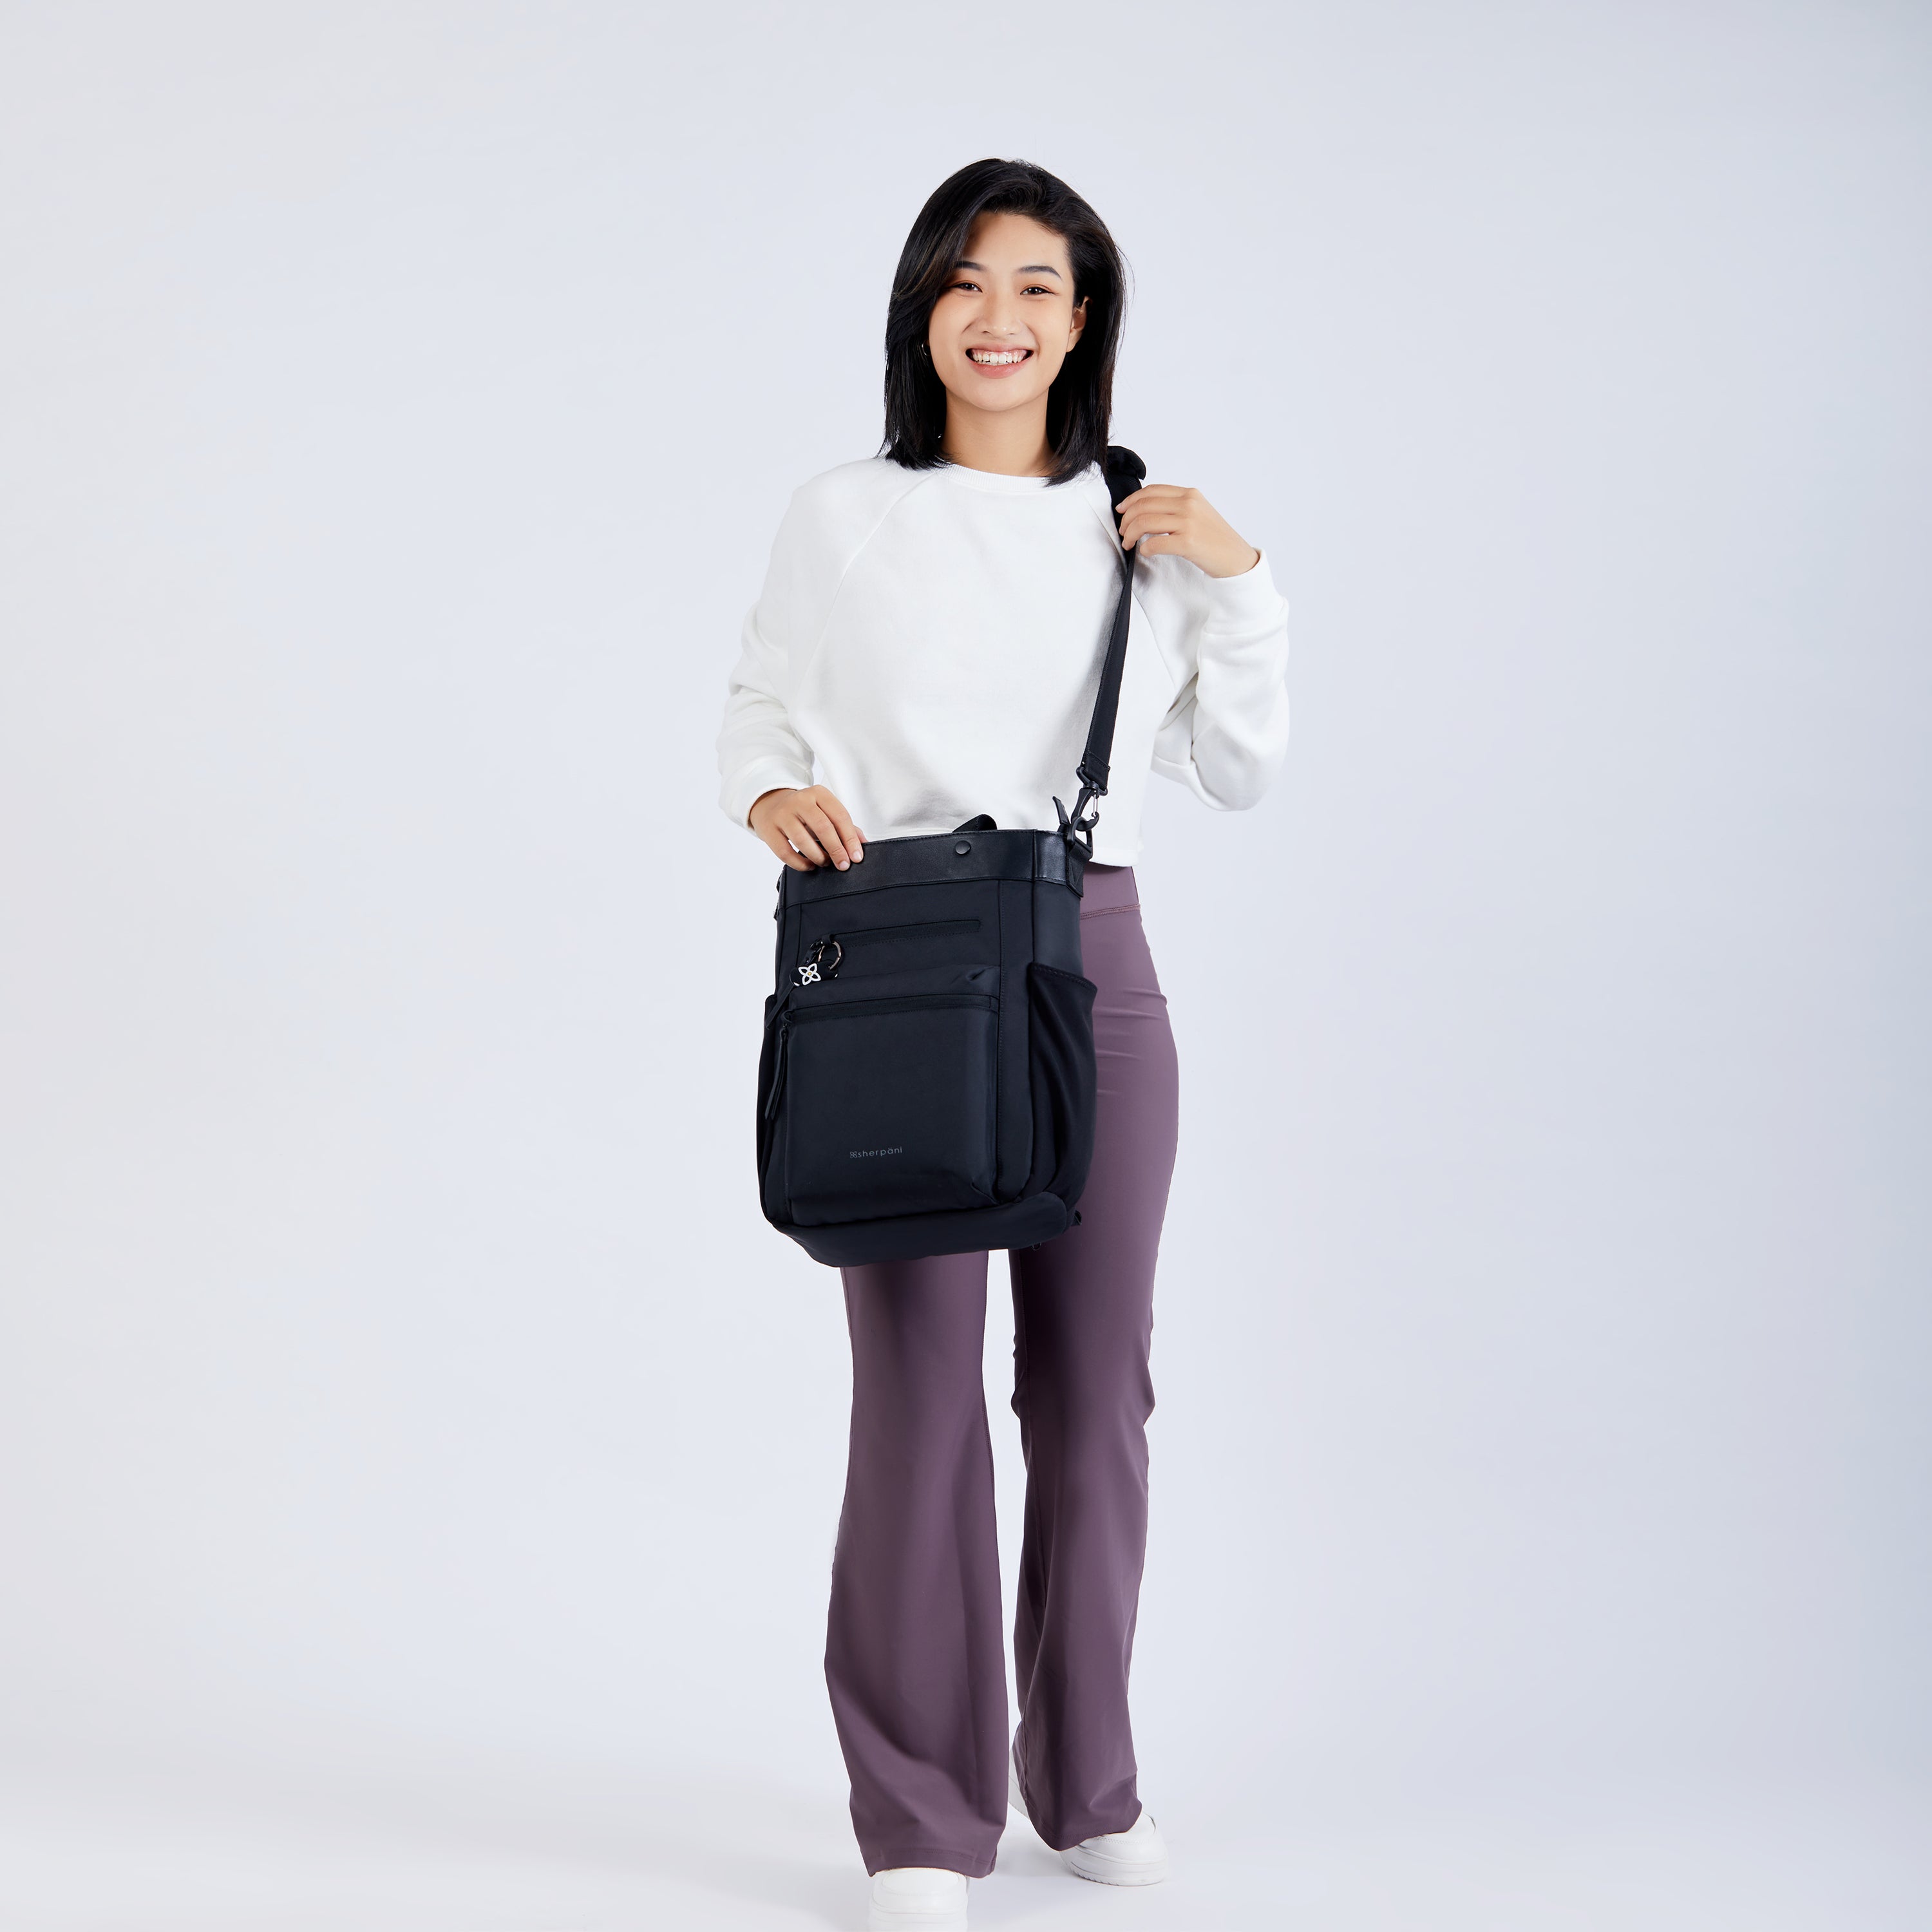 A dark haired model faces the camera and smiles. She is wearing a white shirt, purple leggings and white shoes. She carries Sherpani's Anti-Theft bag, the Soleil in Carbon, as a crossbody.